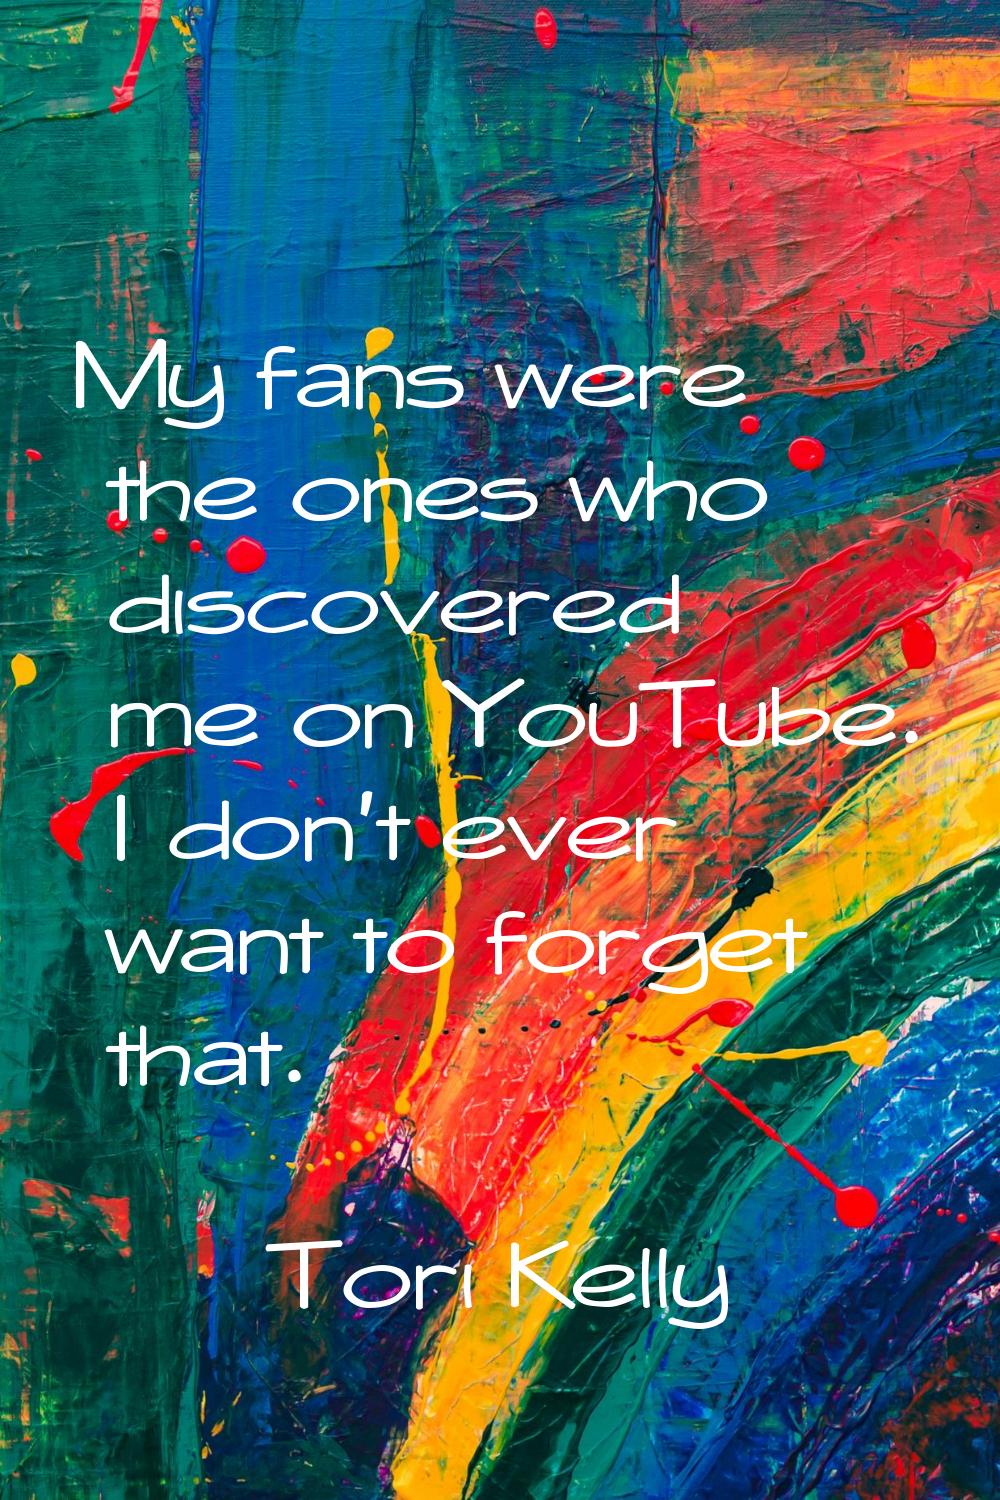 My fans were the ones who discovered me on YouTube. I don't ever want to forget that.